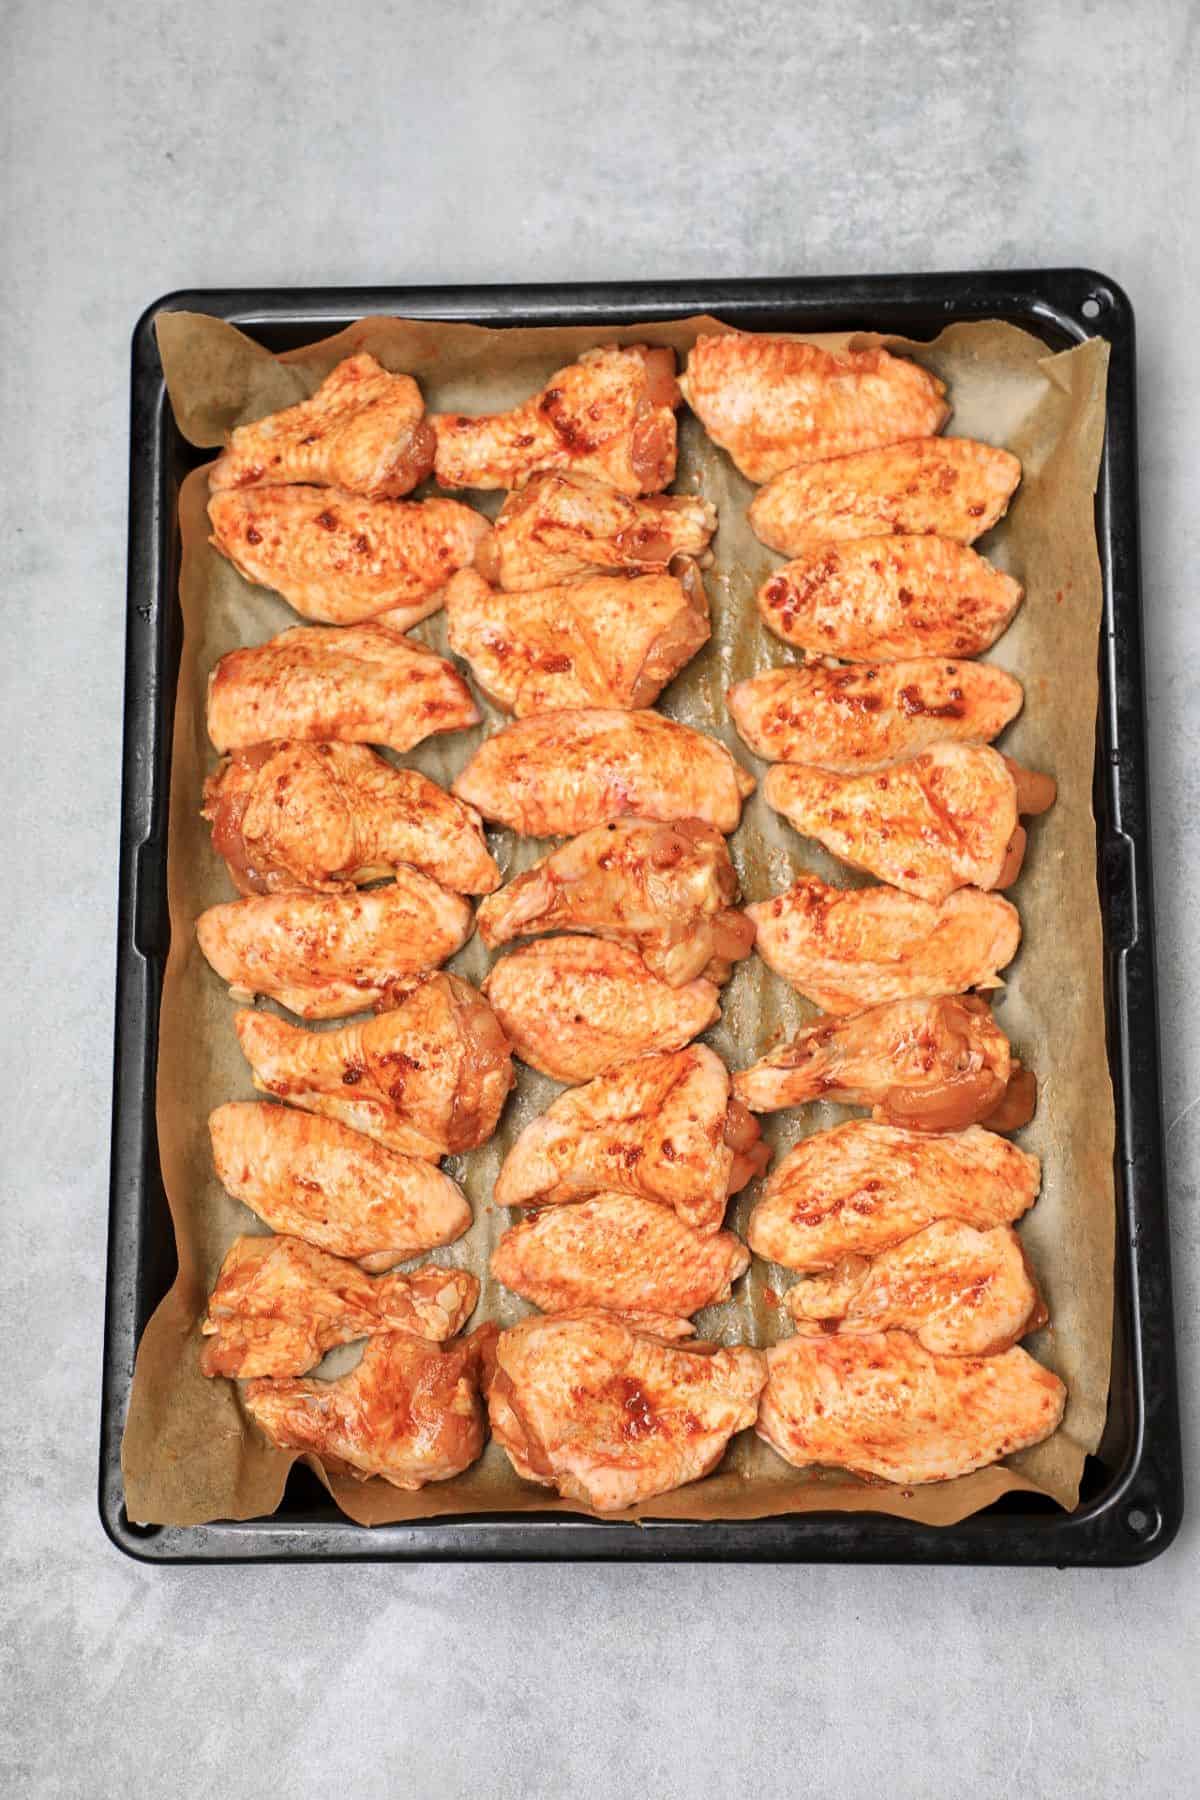 the wings arranged on a baking paper lined tray.